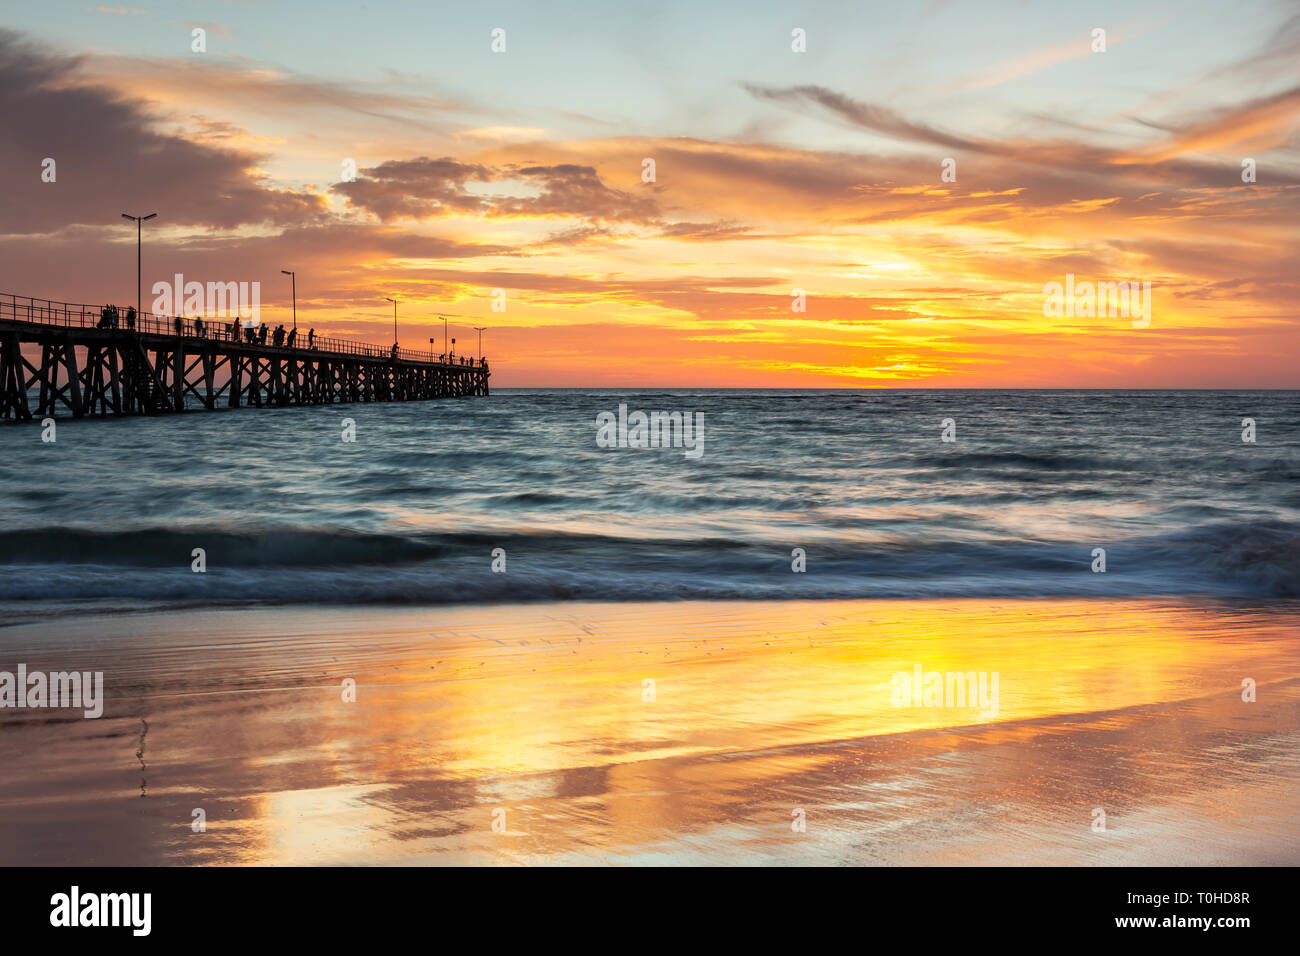 A beautiful sunset at Port Noarlunga with the jetty and sunset reflections on the sand at Port Noarlunga South Australia Stock Photo